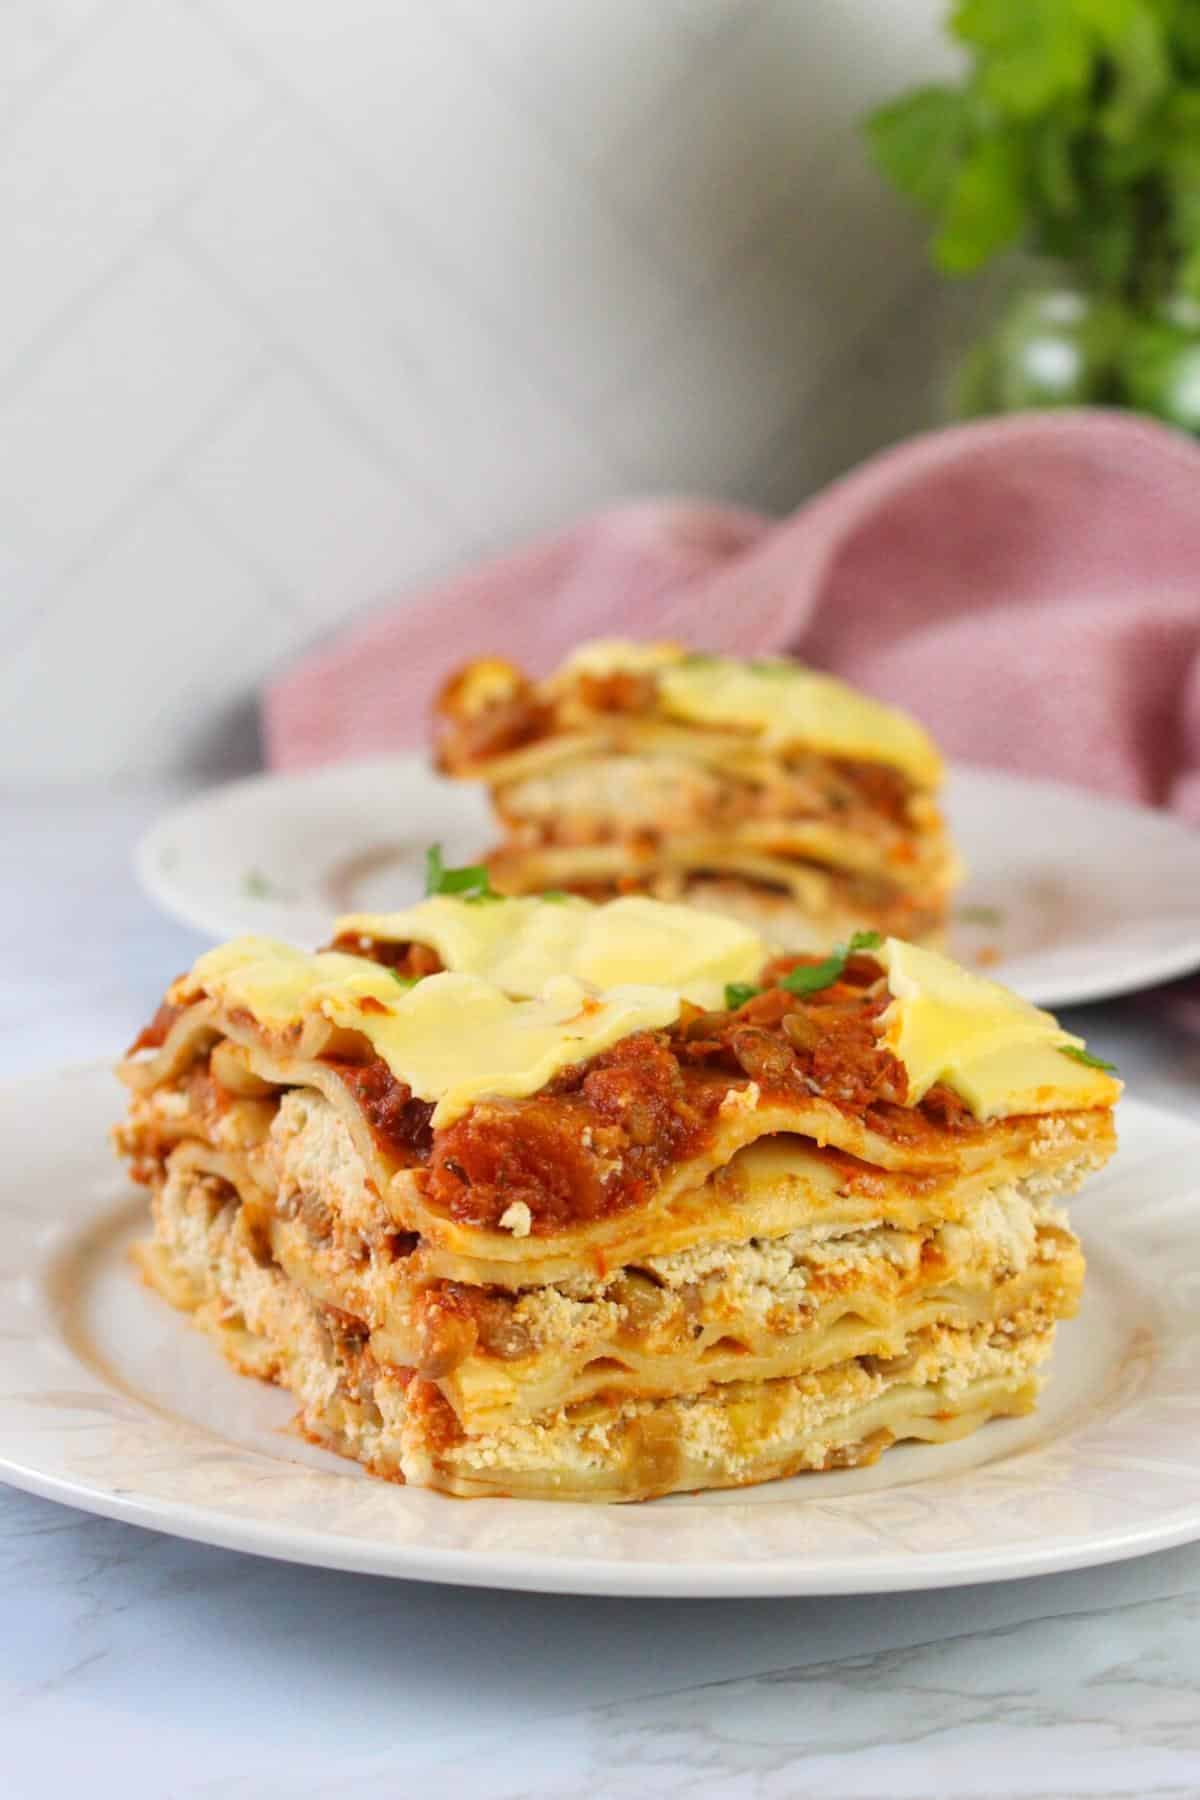 Two slices of dairy free lasagna on a plate